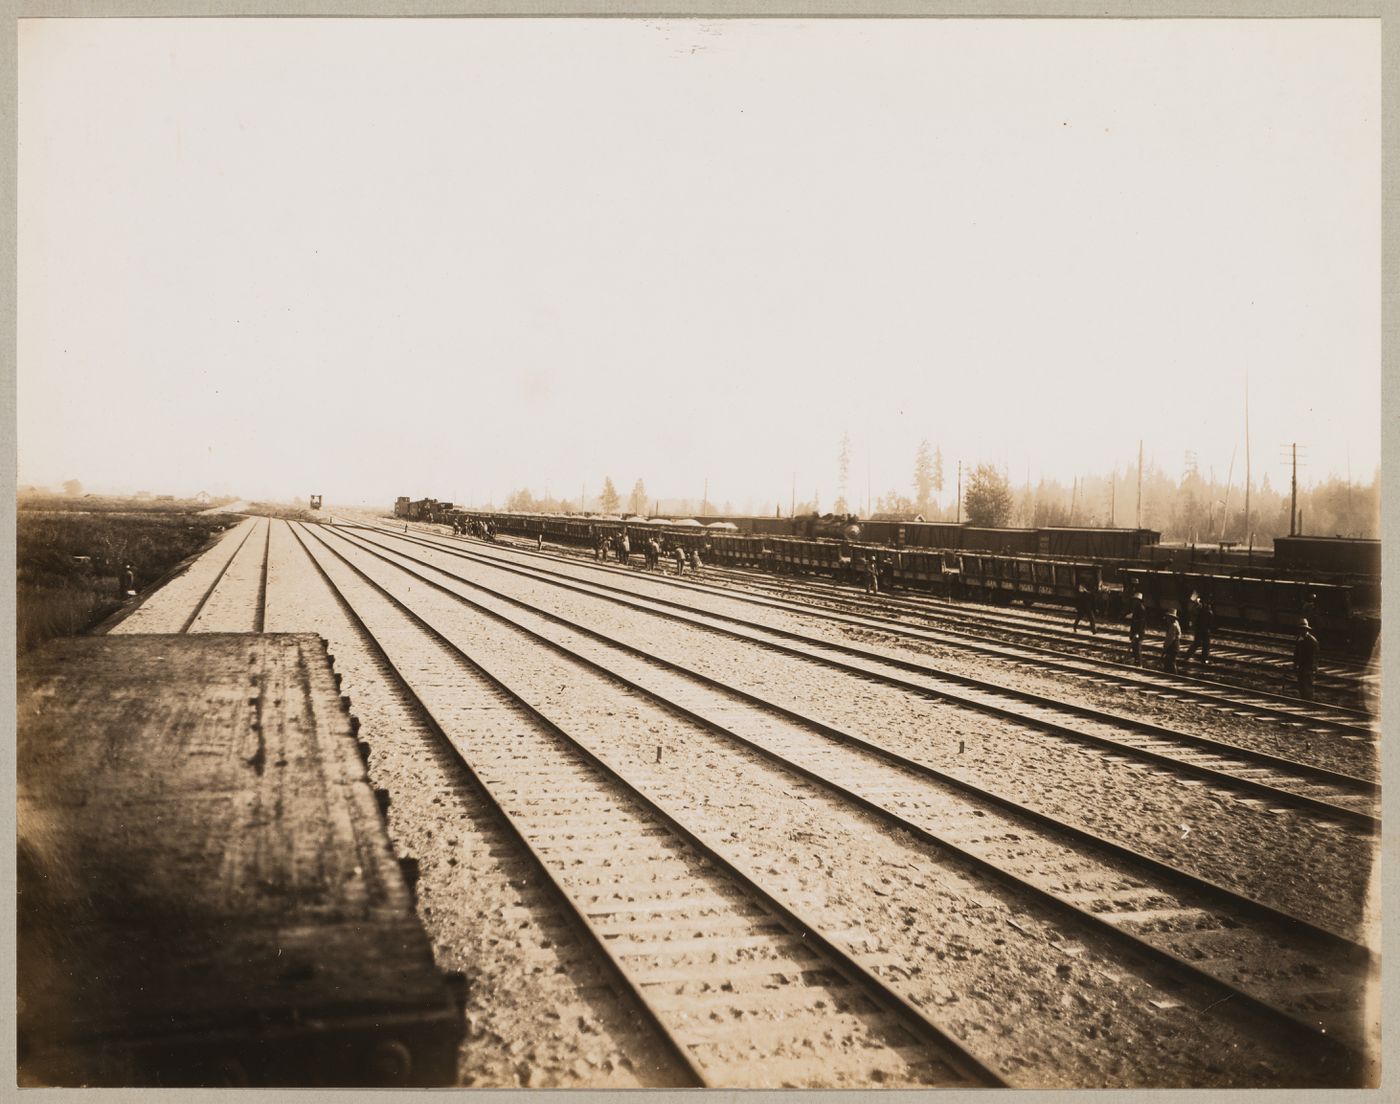 View of the Canadian Pacific Railroad Company freight yards showing workers and trains, Coquitlam (now Port Coquitlam), British Columbia